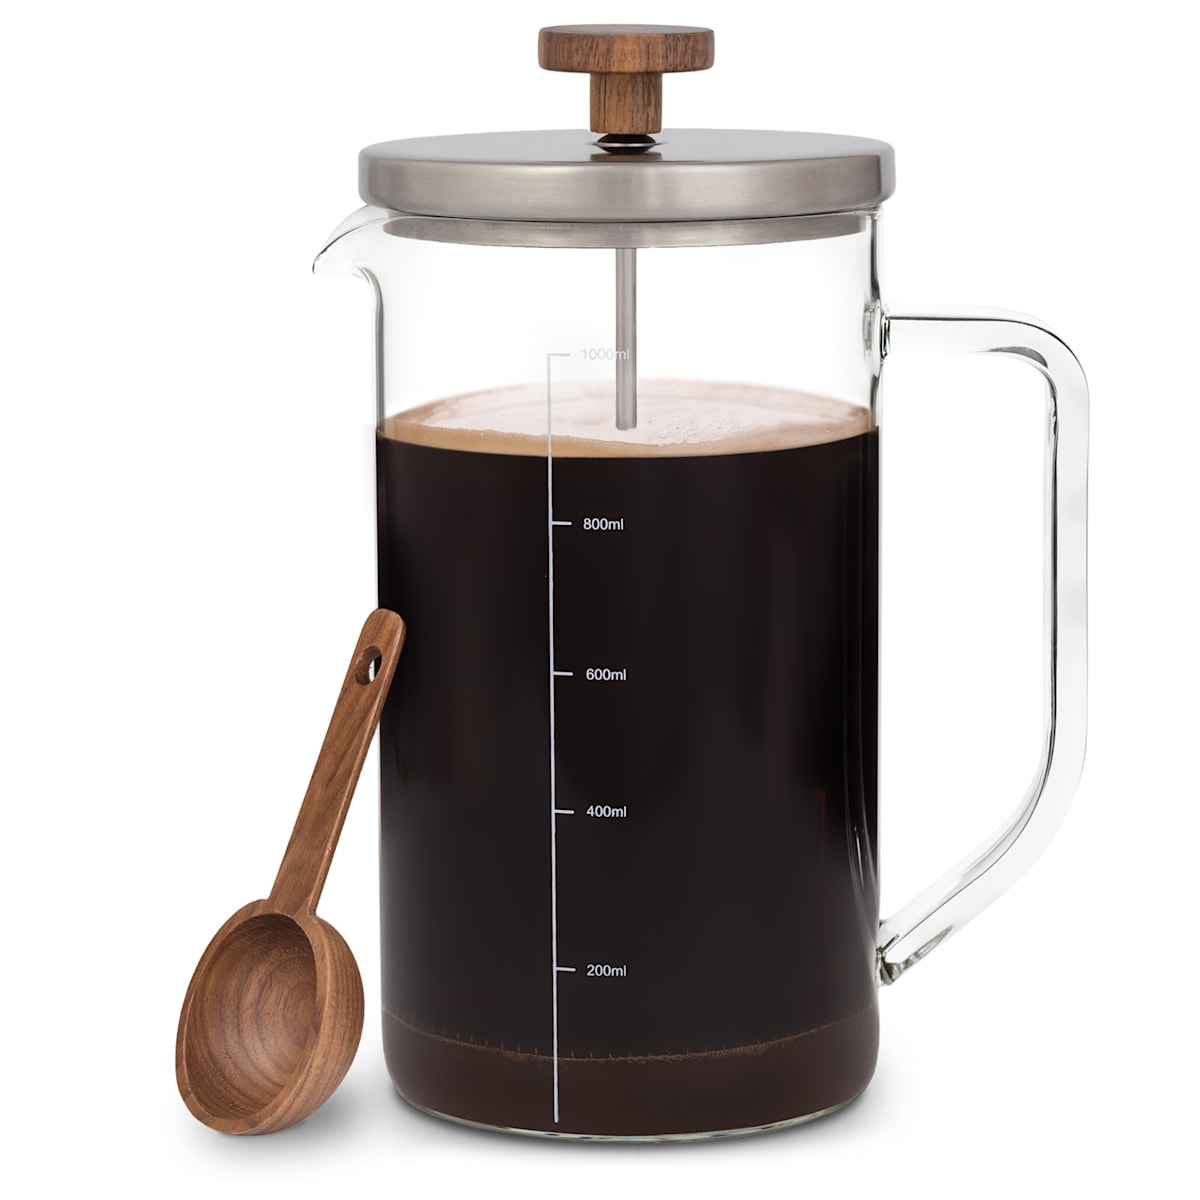 Ristretto cafetière 1 liter edelstaal walnoothout Ltr